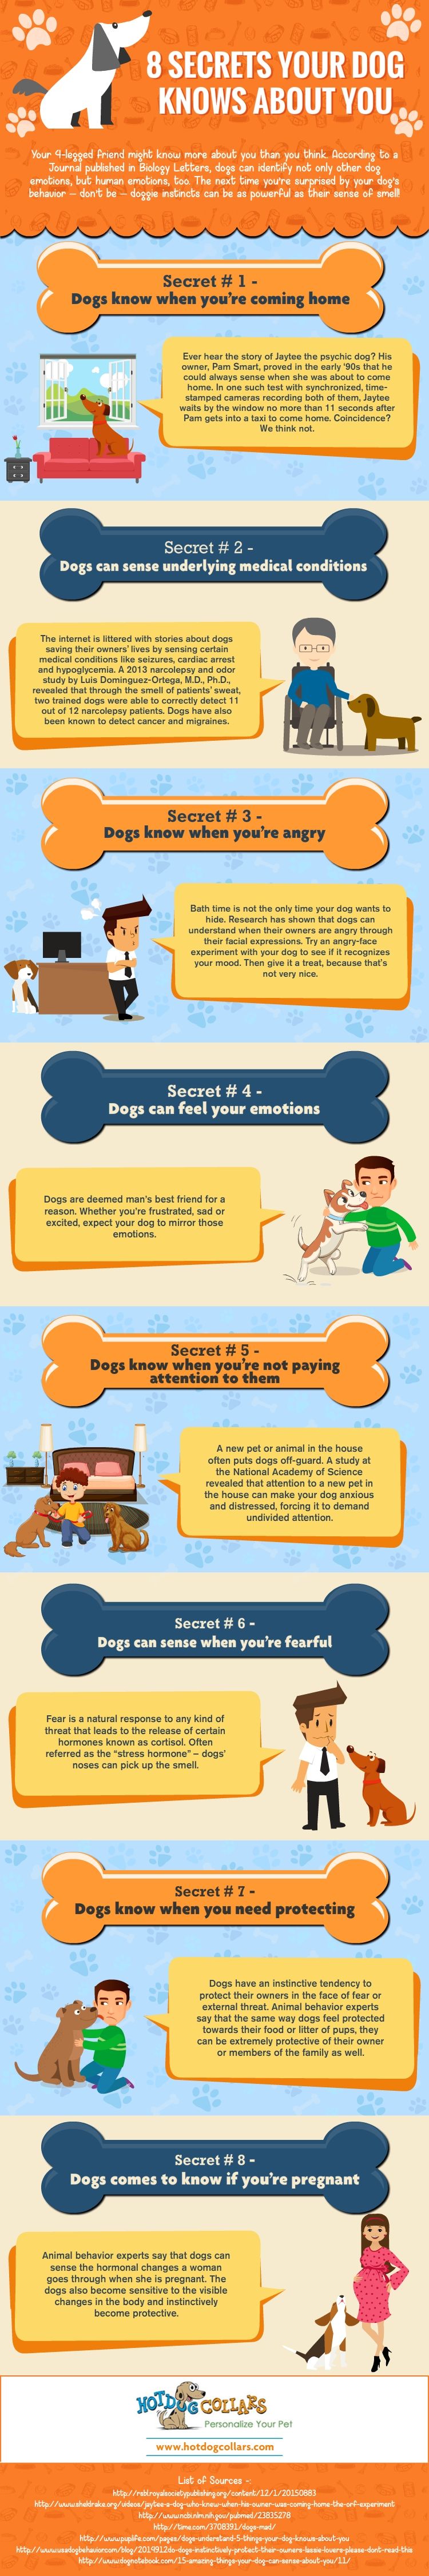 8 Secrets Your Dog Knows About You